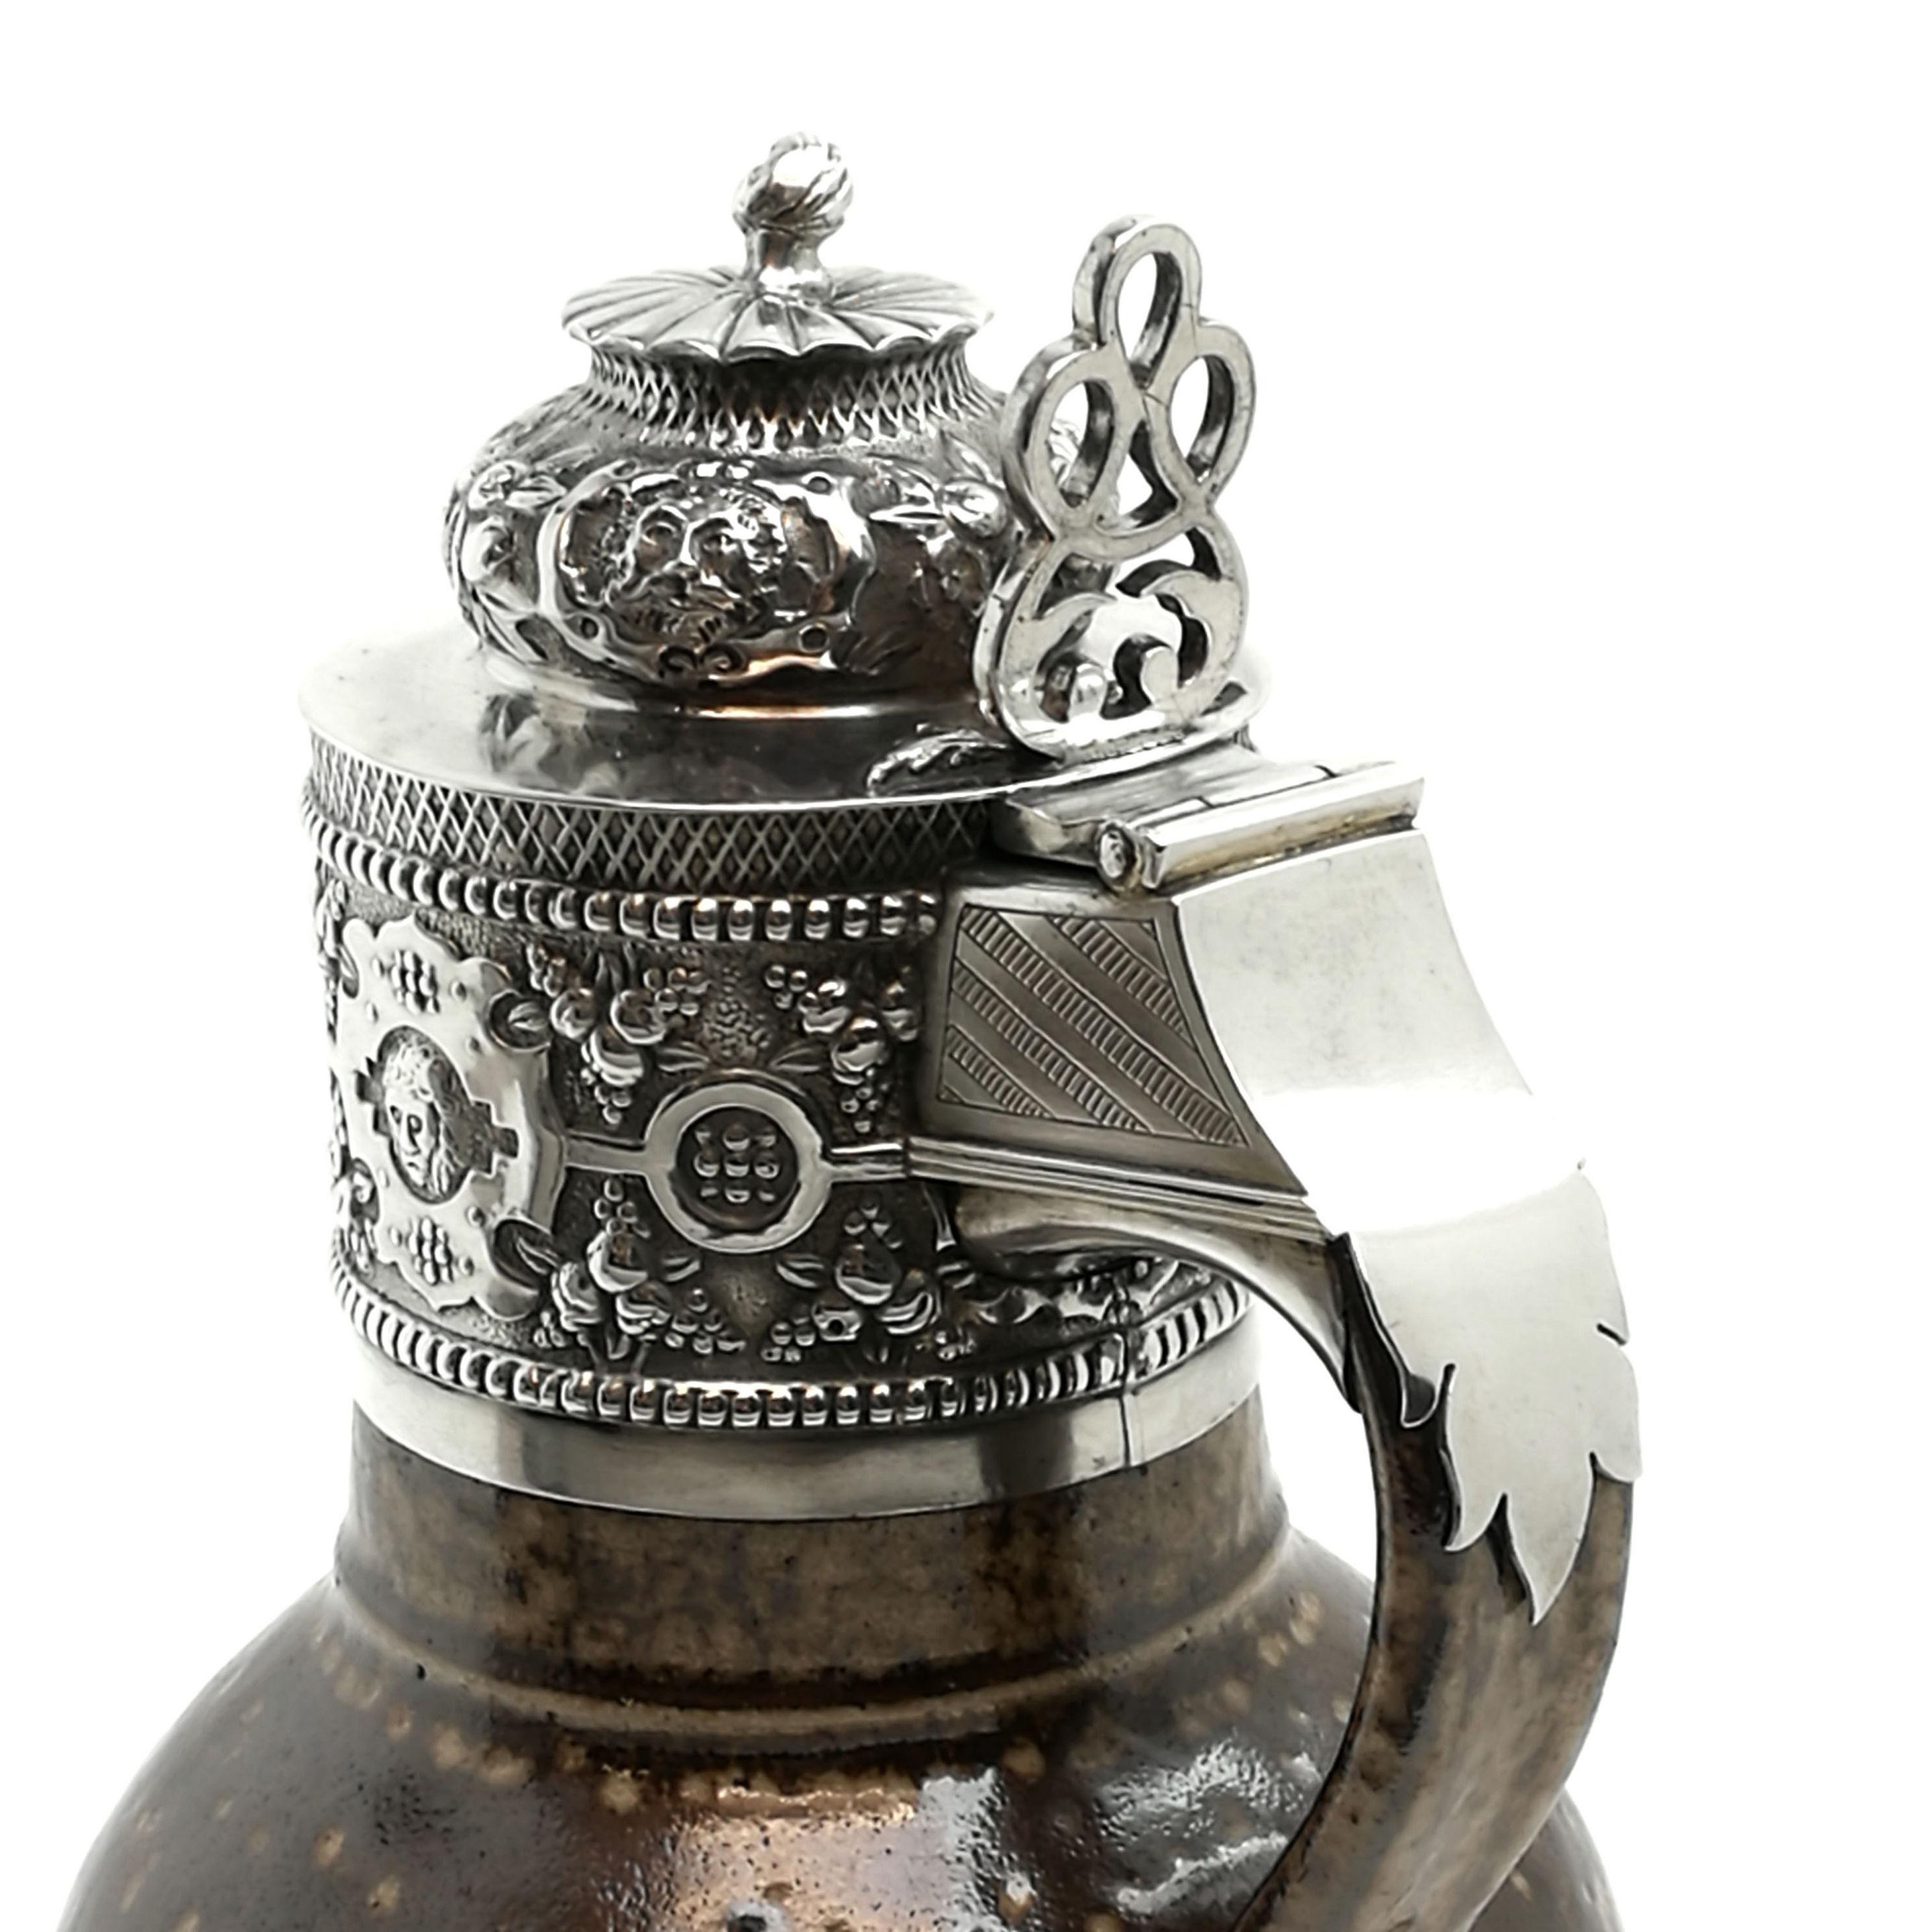 20th Century Sterling Silver Mounted Tigerware Jug 1920 Elizabethan, 16th-17th Century Style